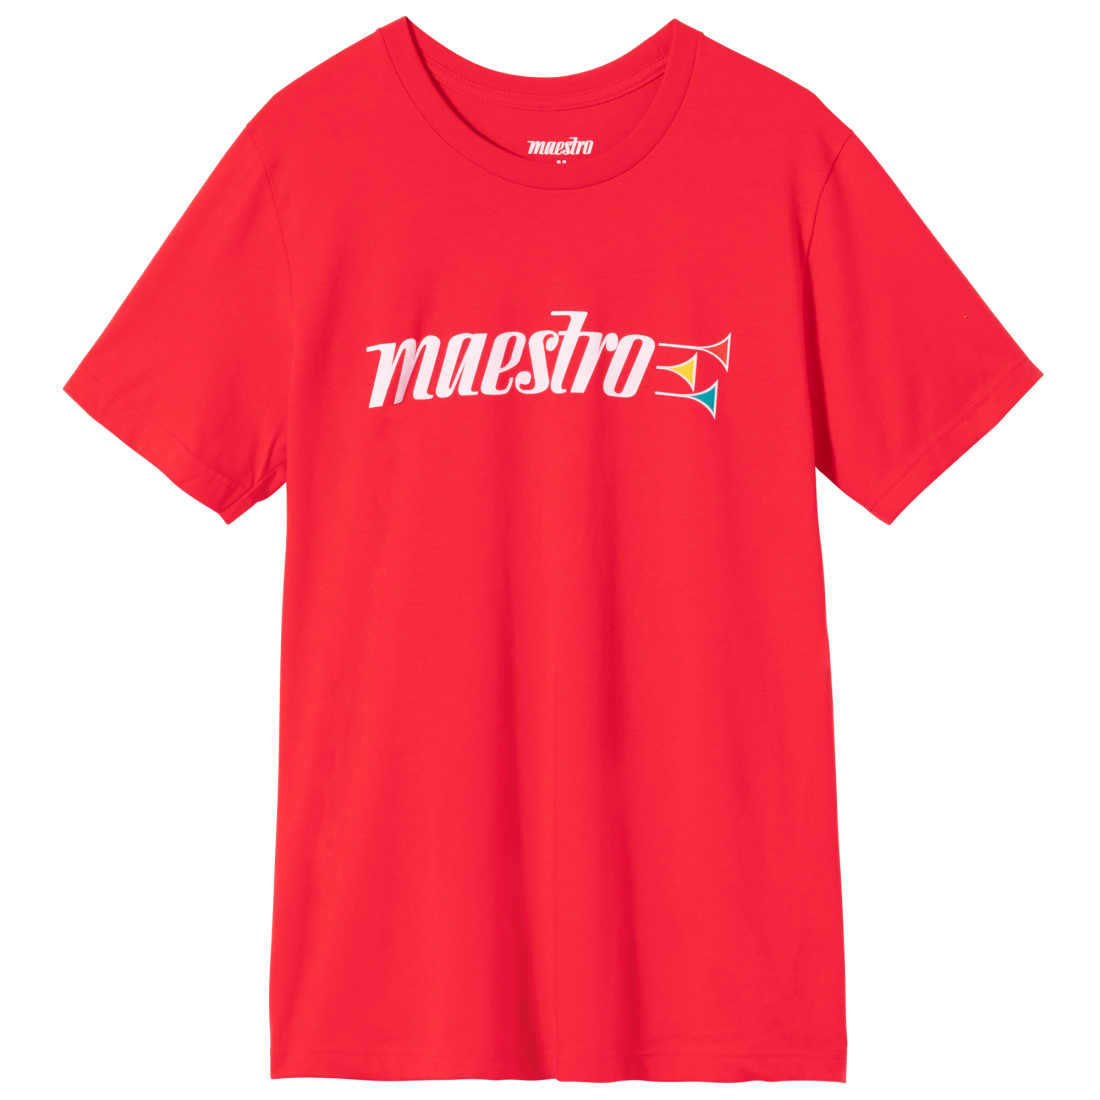 Maestro Trumpets T Shirt Red - S